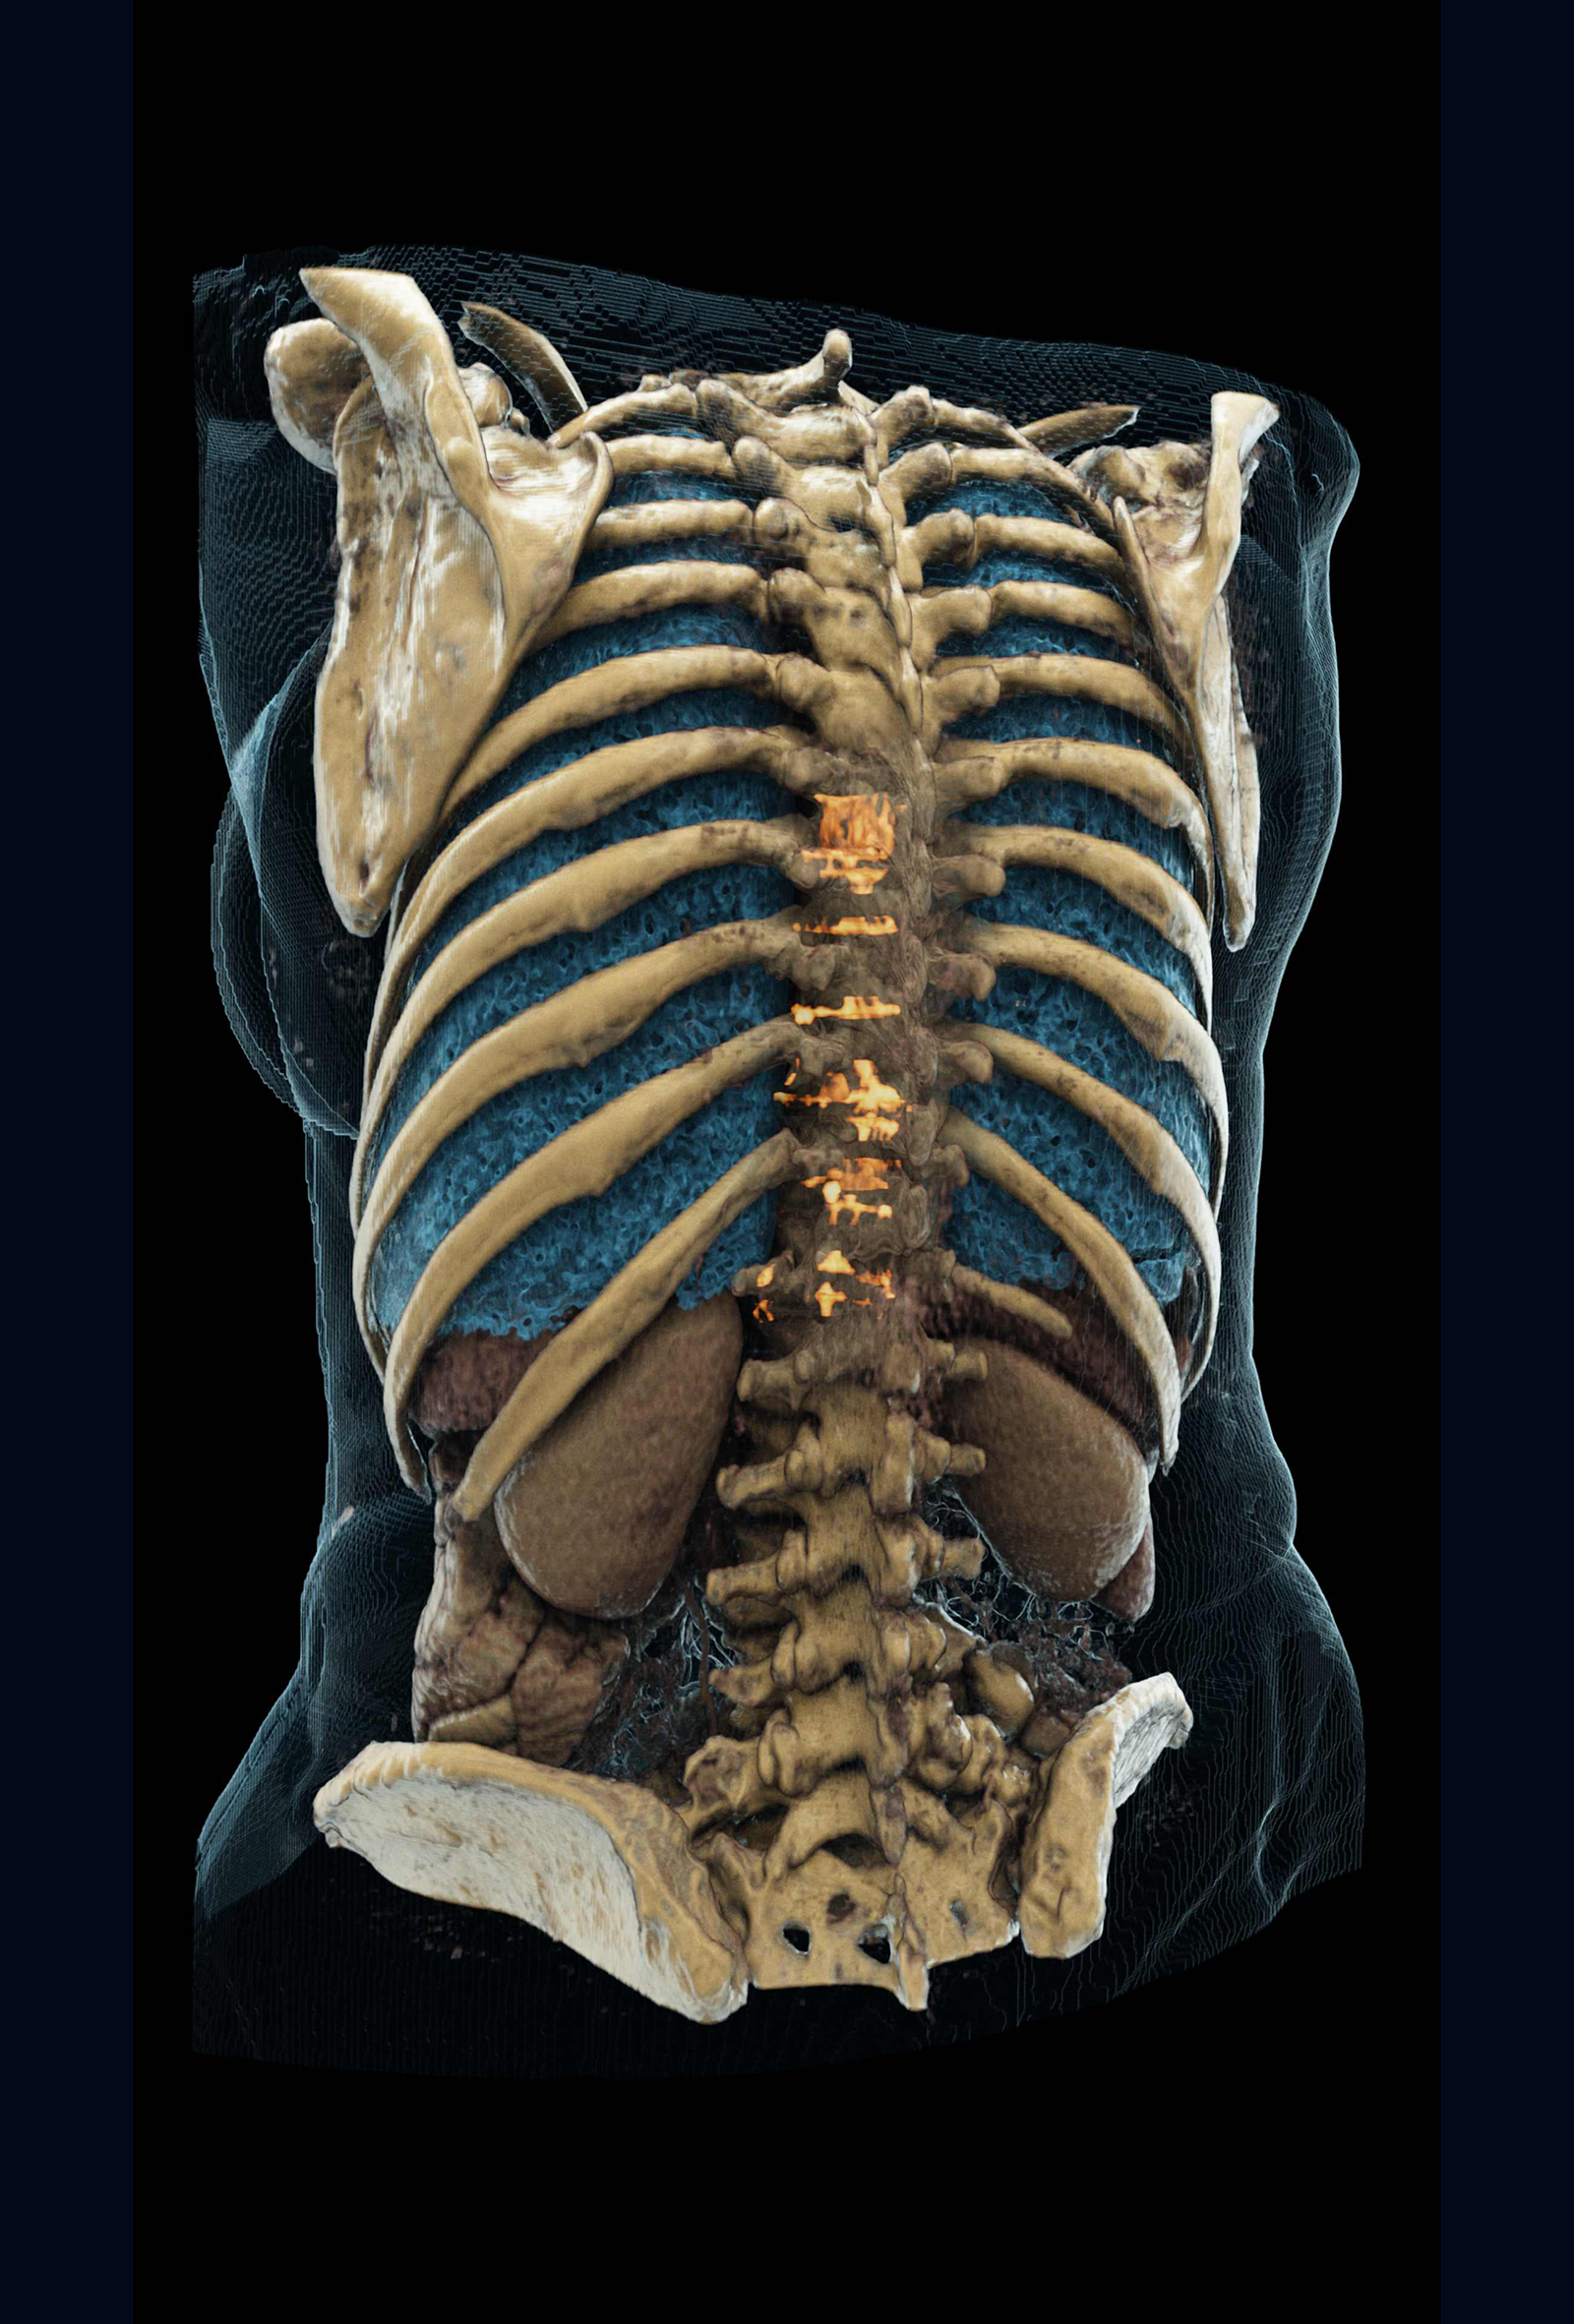 3D Visualization of a patient CT image with highlighted metastases of the spine. Deep learning methods help discover bone metastases, which can be overlooked in clinical routine. CT dataset courtesy of Radboudumc, Nijmegen, NL. 